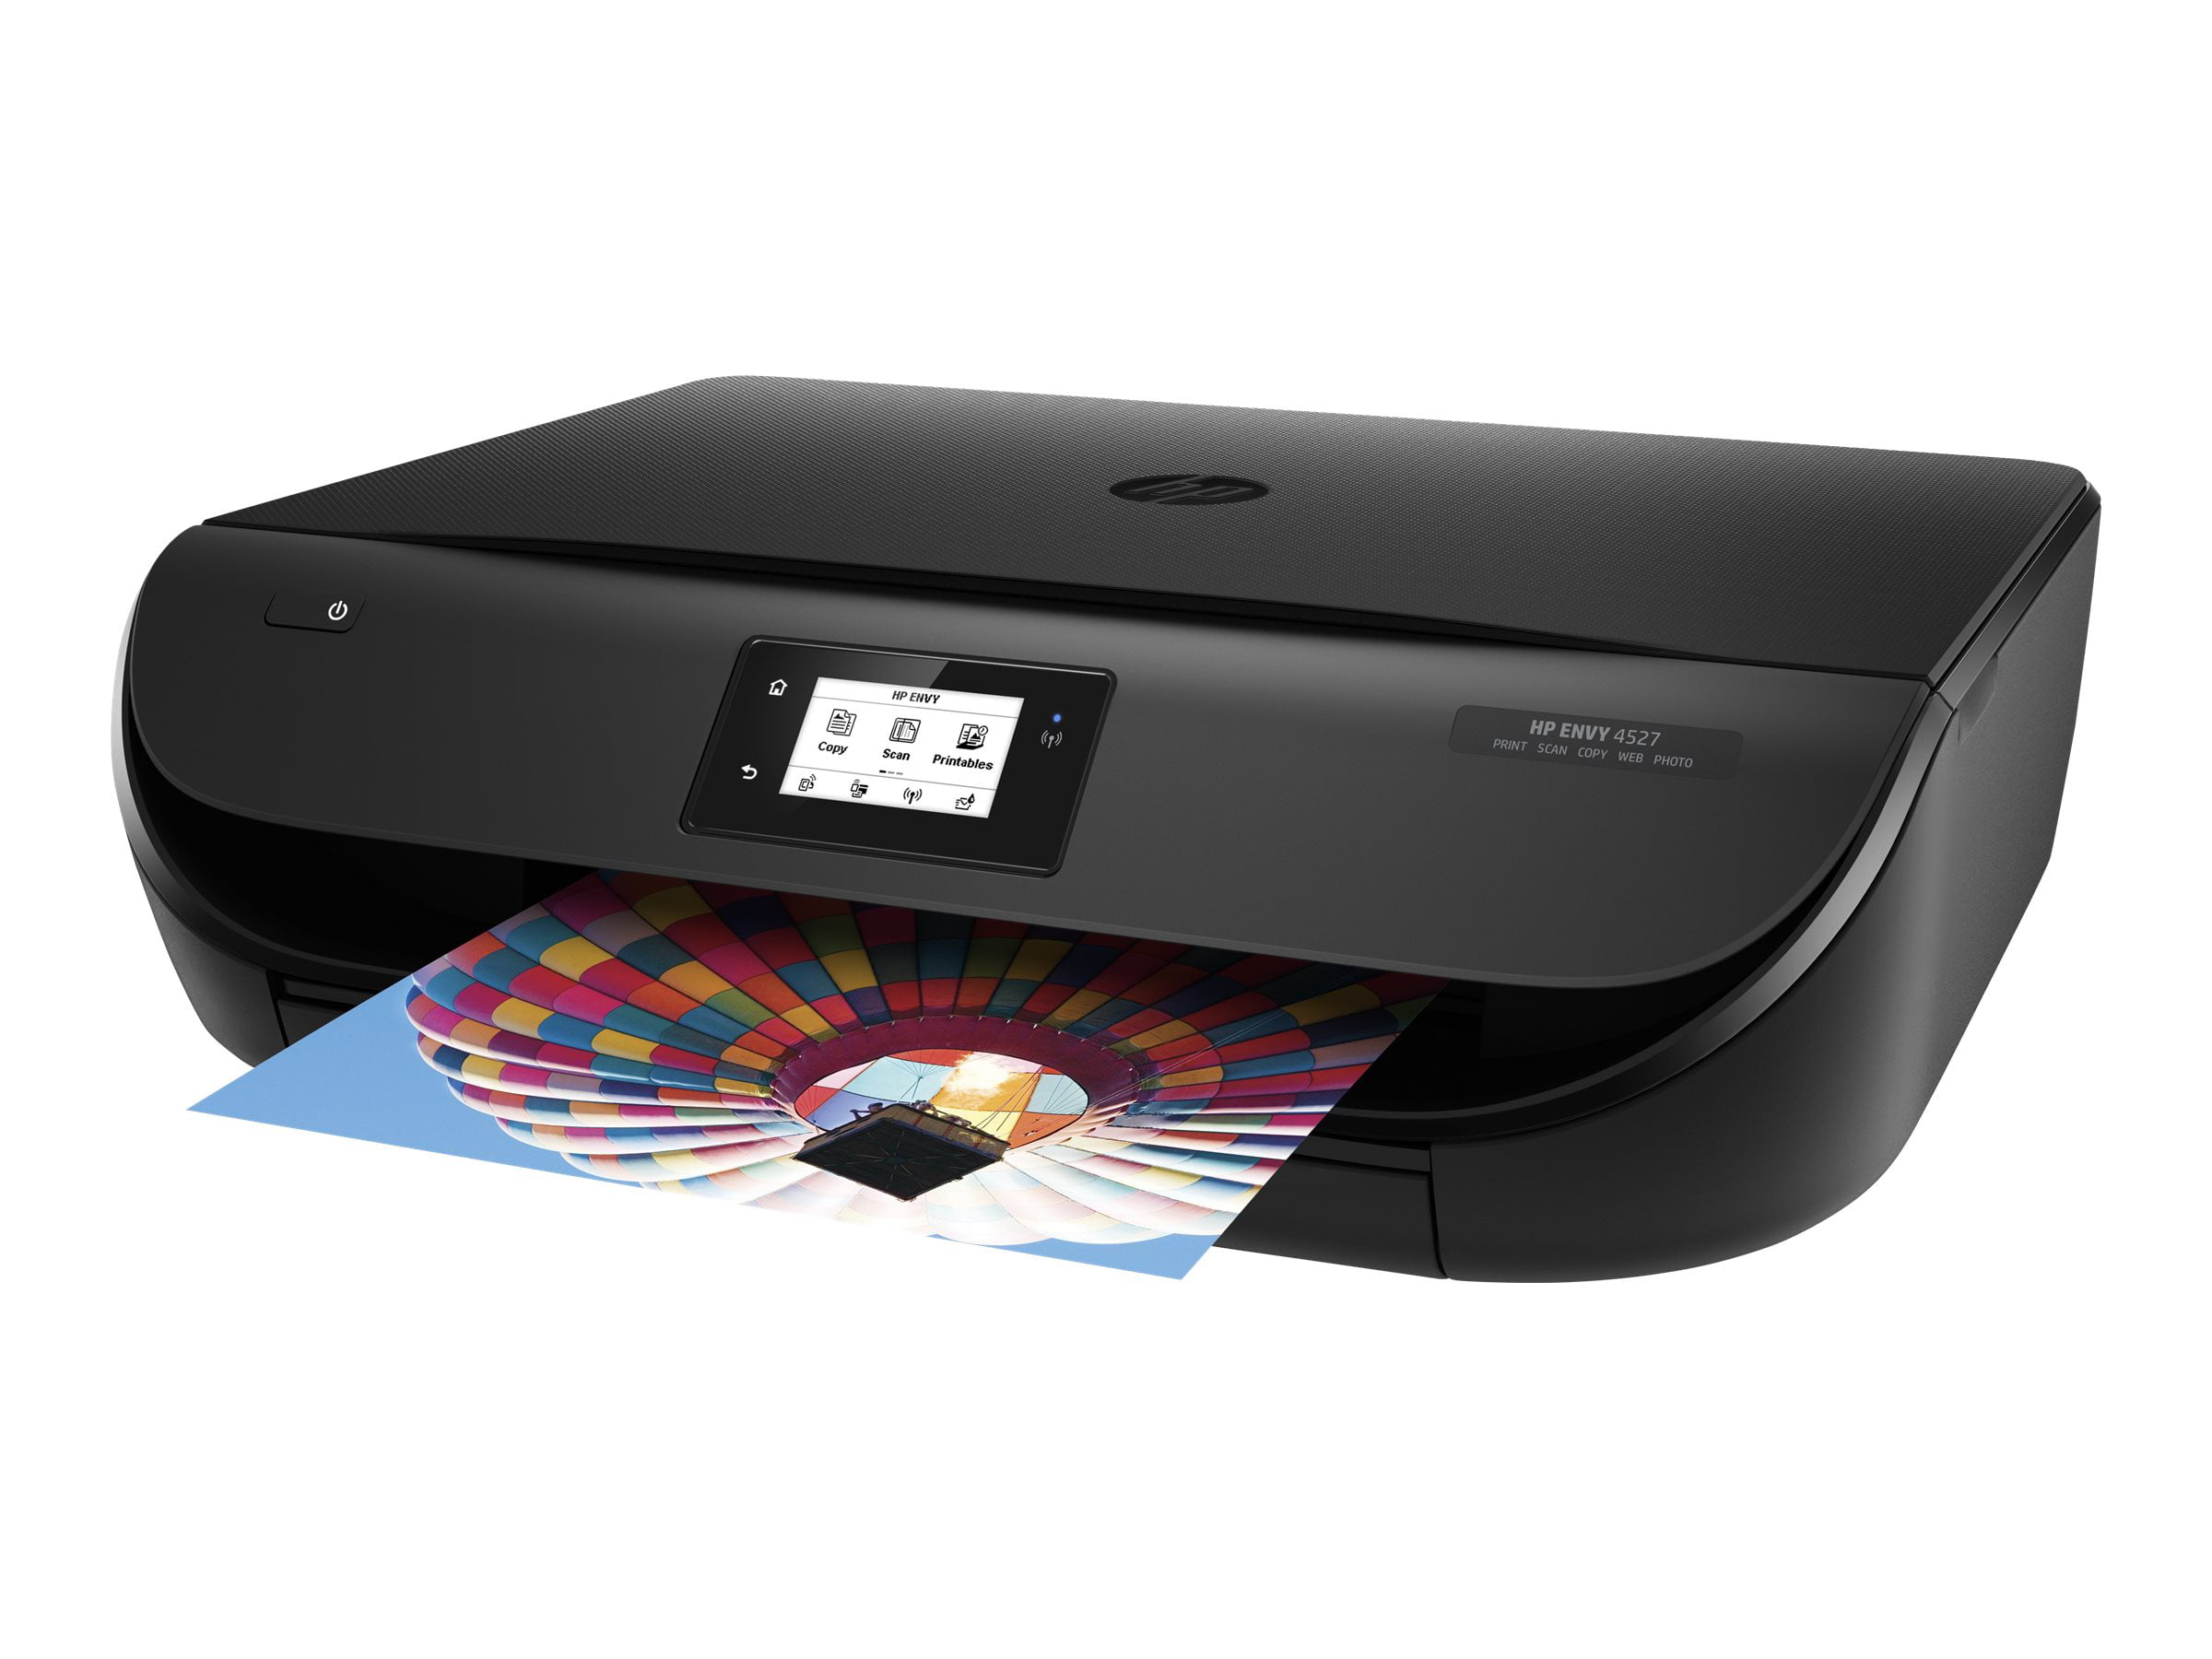 HP ENVY 4524 All-in-One - printer - color - ink-jet - 8.5 in x 11.7 (original) - A4/Legal (media) - up to ppm (copying) - up to 9.5 ppm (